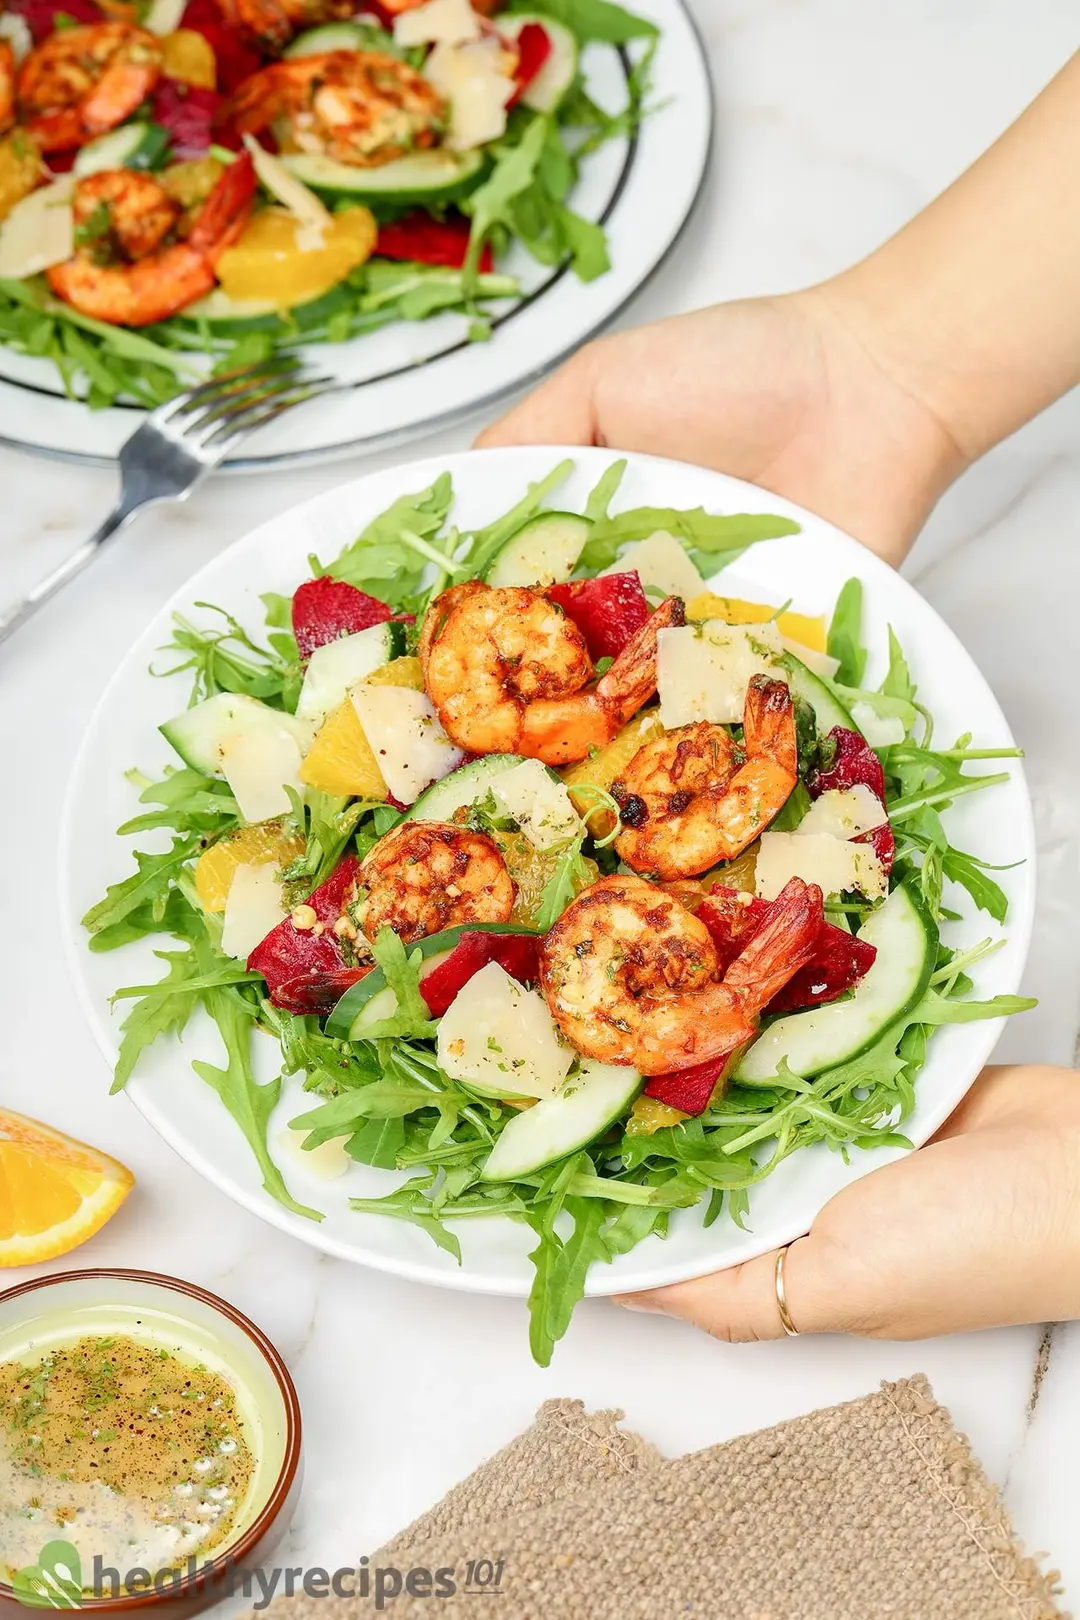 How to Store Leftovers Grilled Shrimp Salad